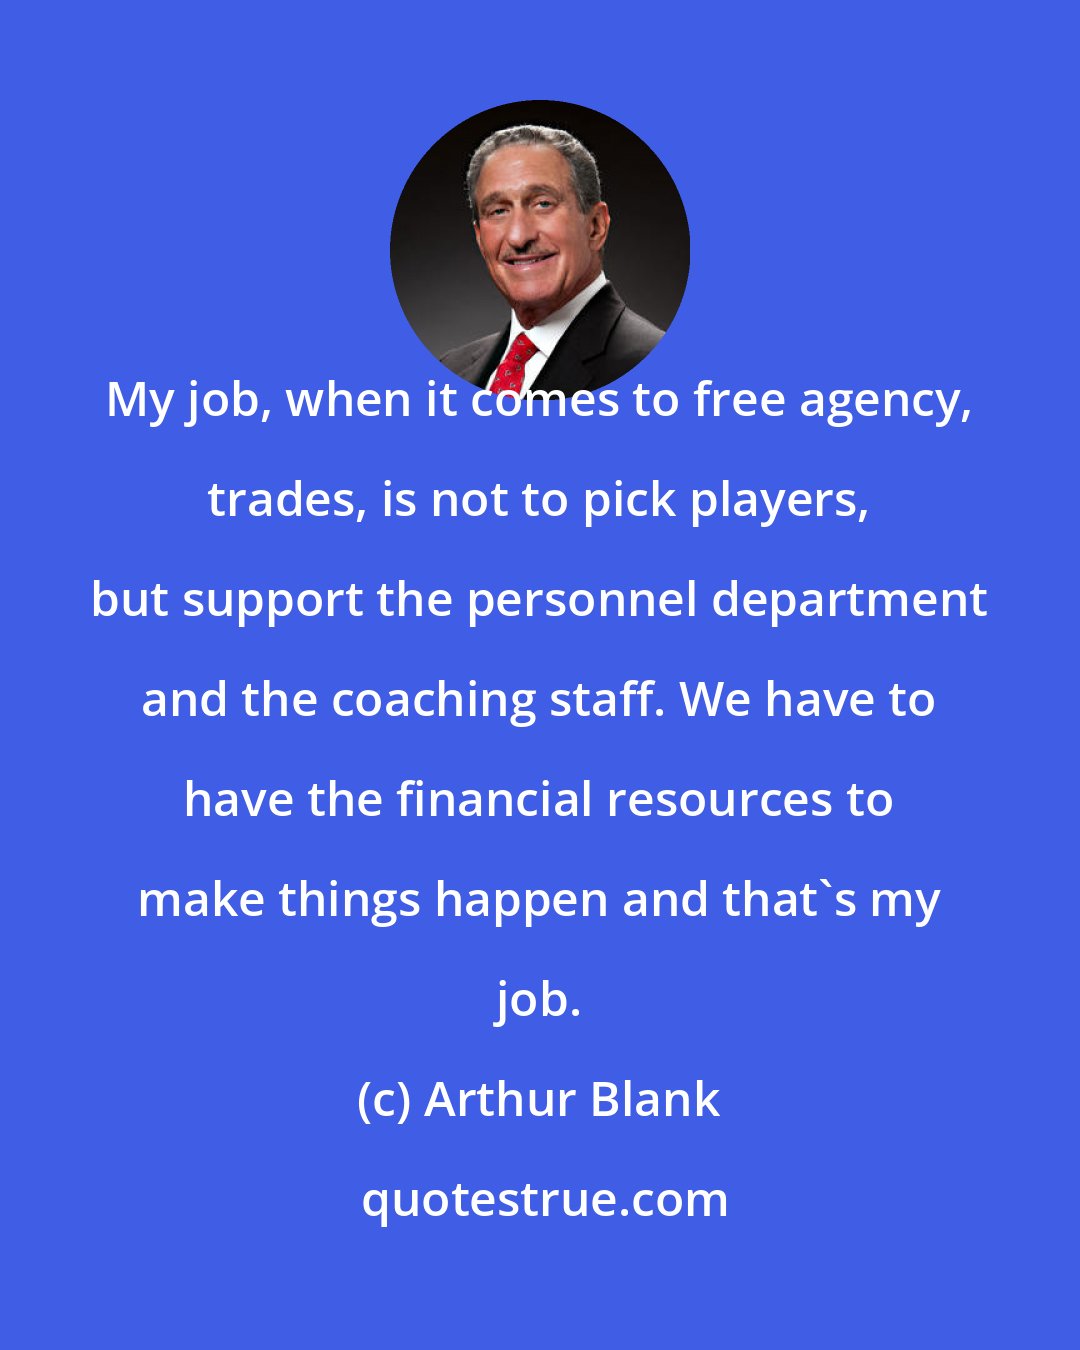 Arthur Blank: My job, when it comes to free agency, trades, is not to pick players, but support the personnel department and the coaching staff. We have to have the financial resources to make things happen and that's my job.